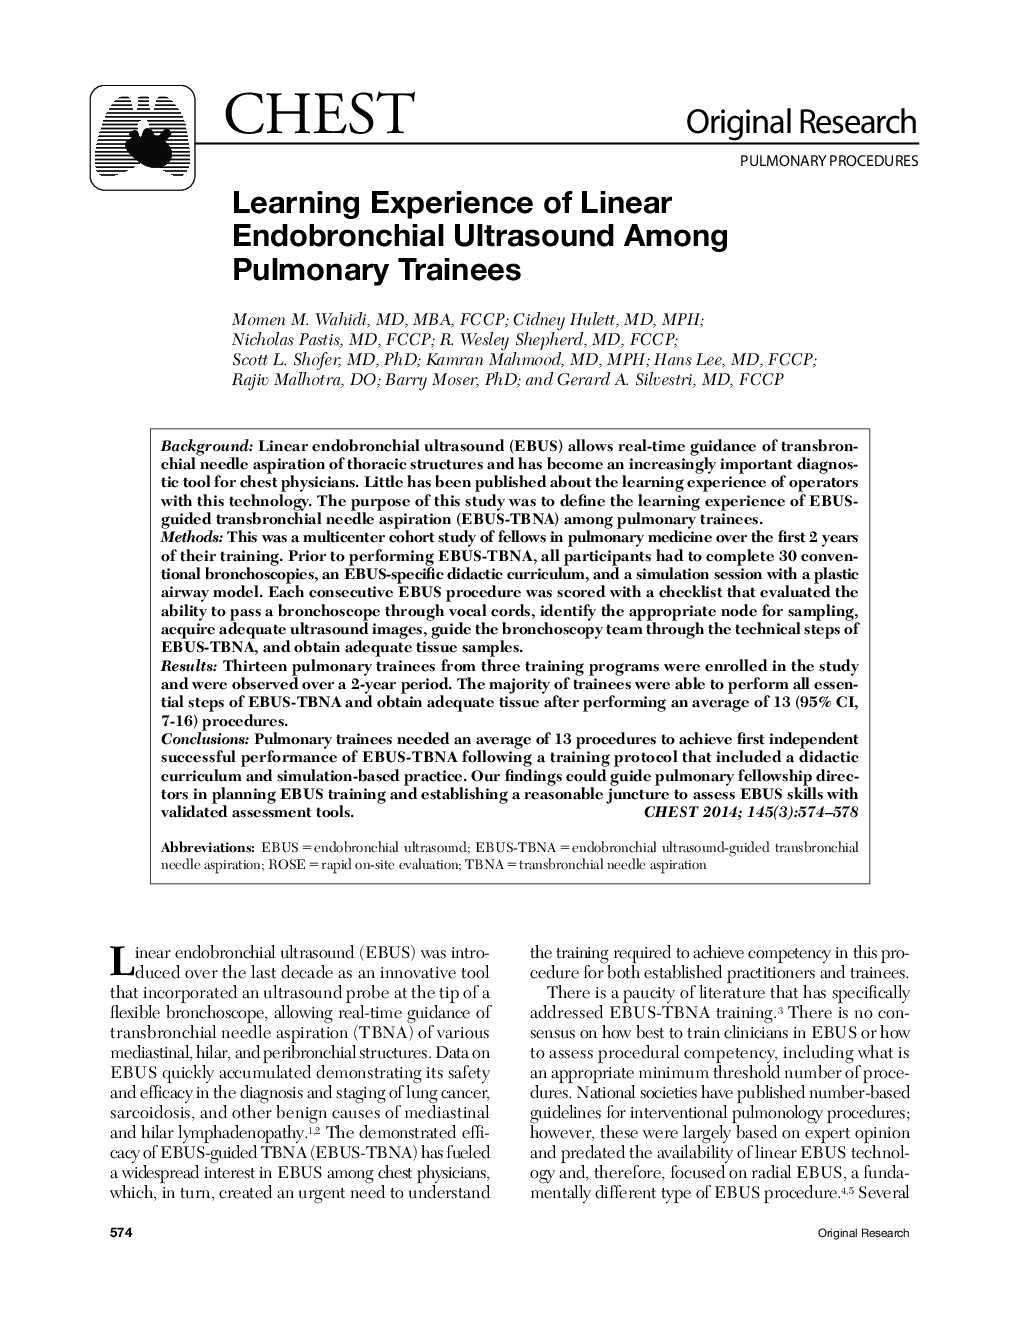 Learning Experience of Linear Endobronchial Ultrasound Among Pulmonary Trainees 